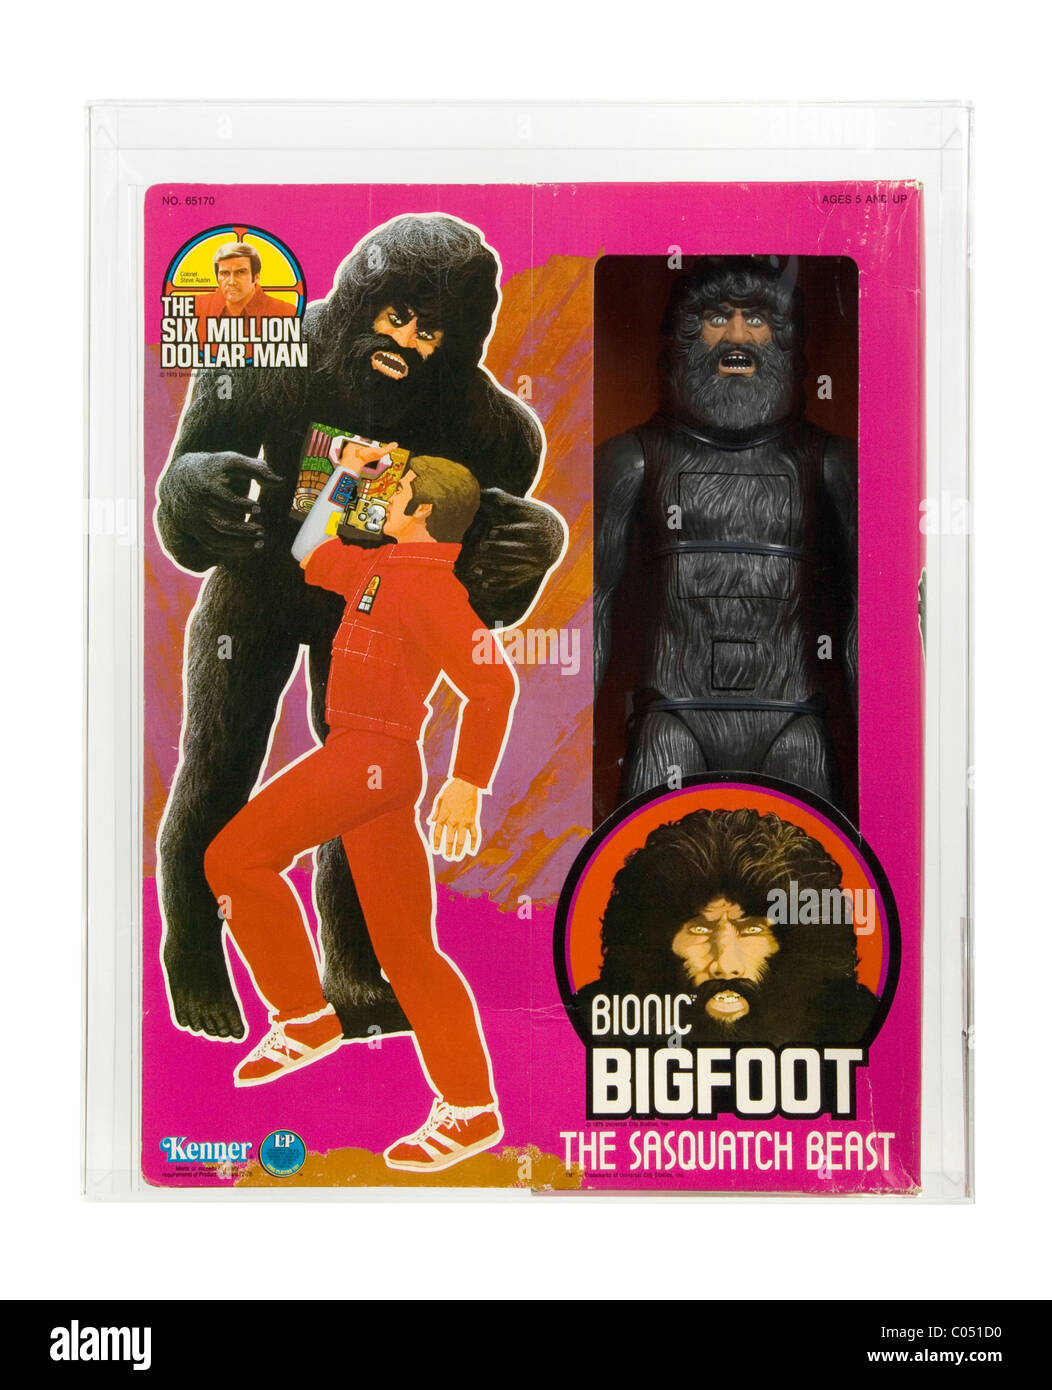 1977 Bionic Bigfoot from the Six Million Dollar Man Series, made by Kenner. MISB, NRFB, AFA 75 EX+/NM (Excellent+/Near Mint). Stock Photo